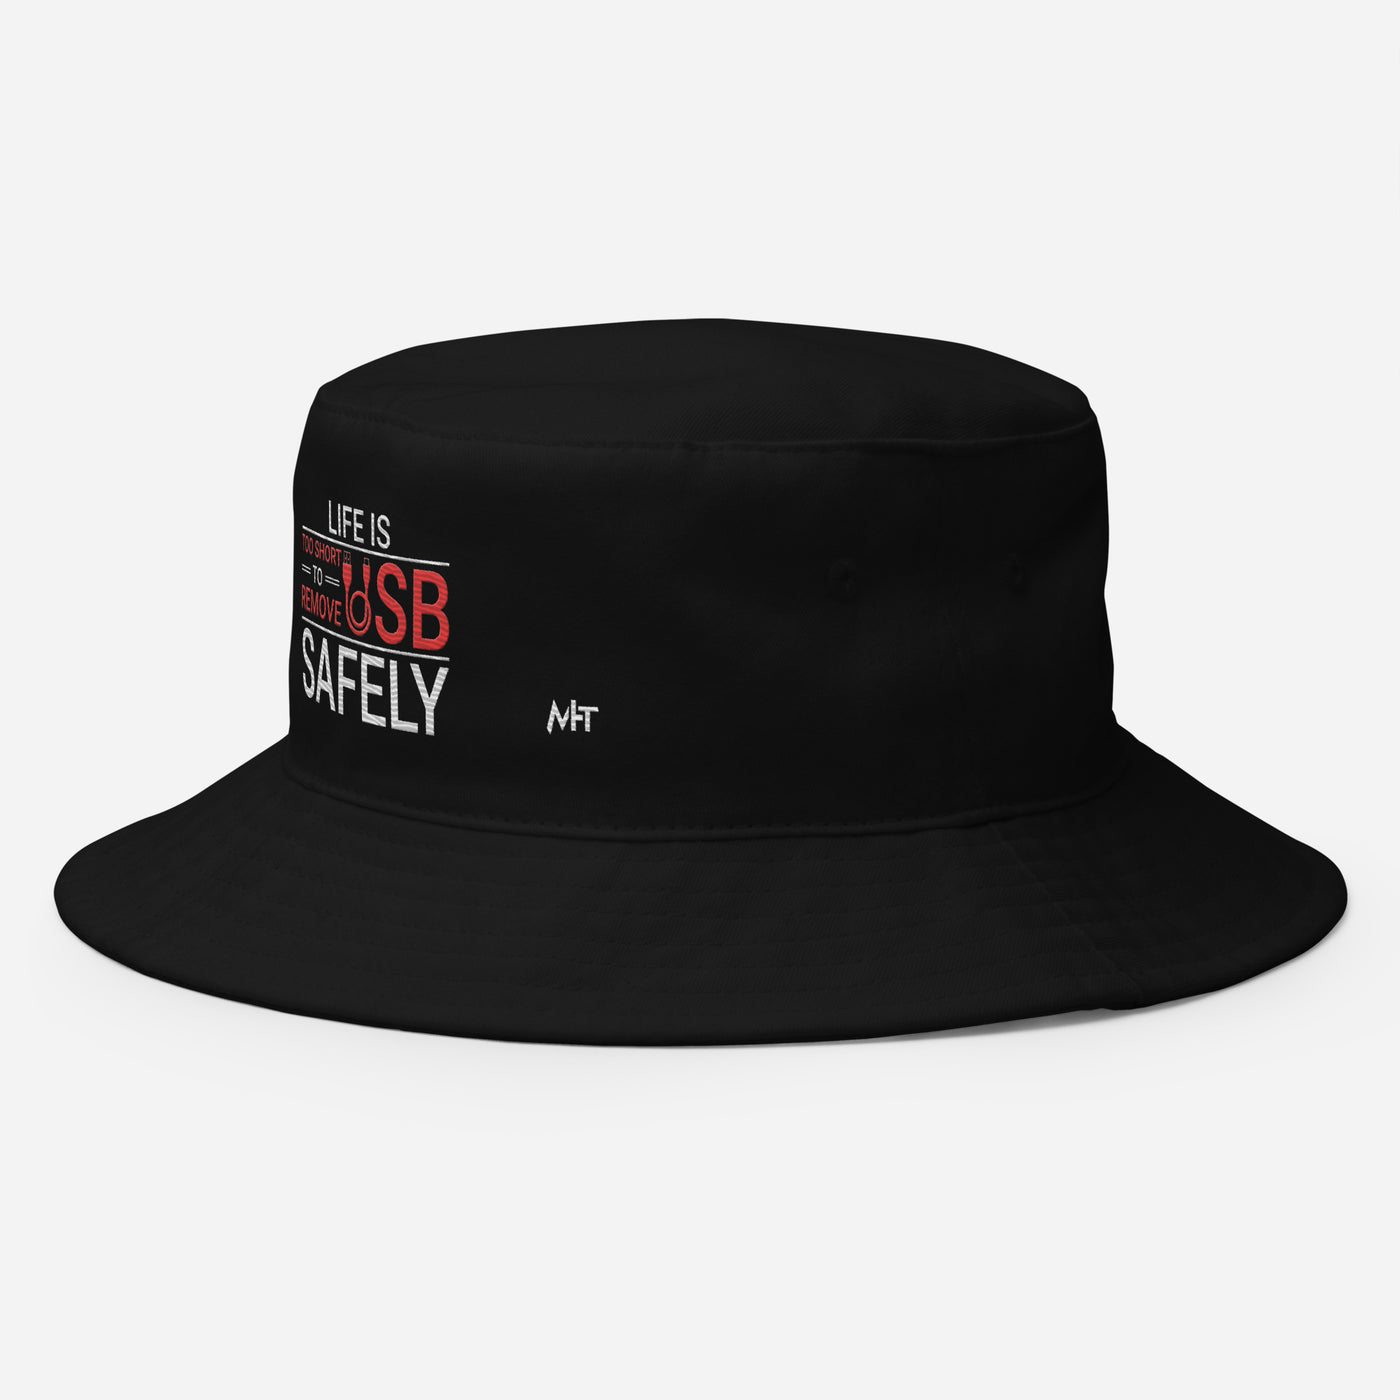 Life is too Short to Remove USB Safely - Bucket Hat